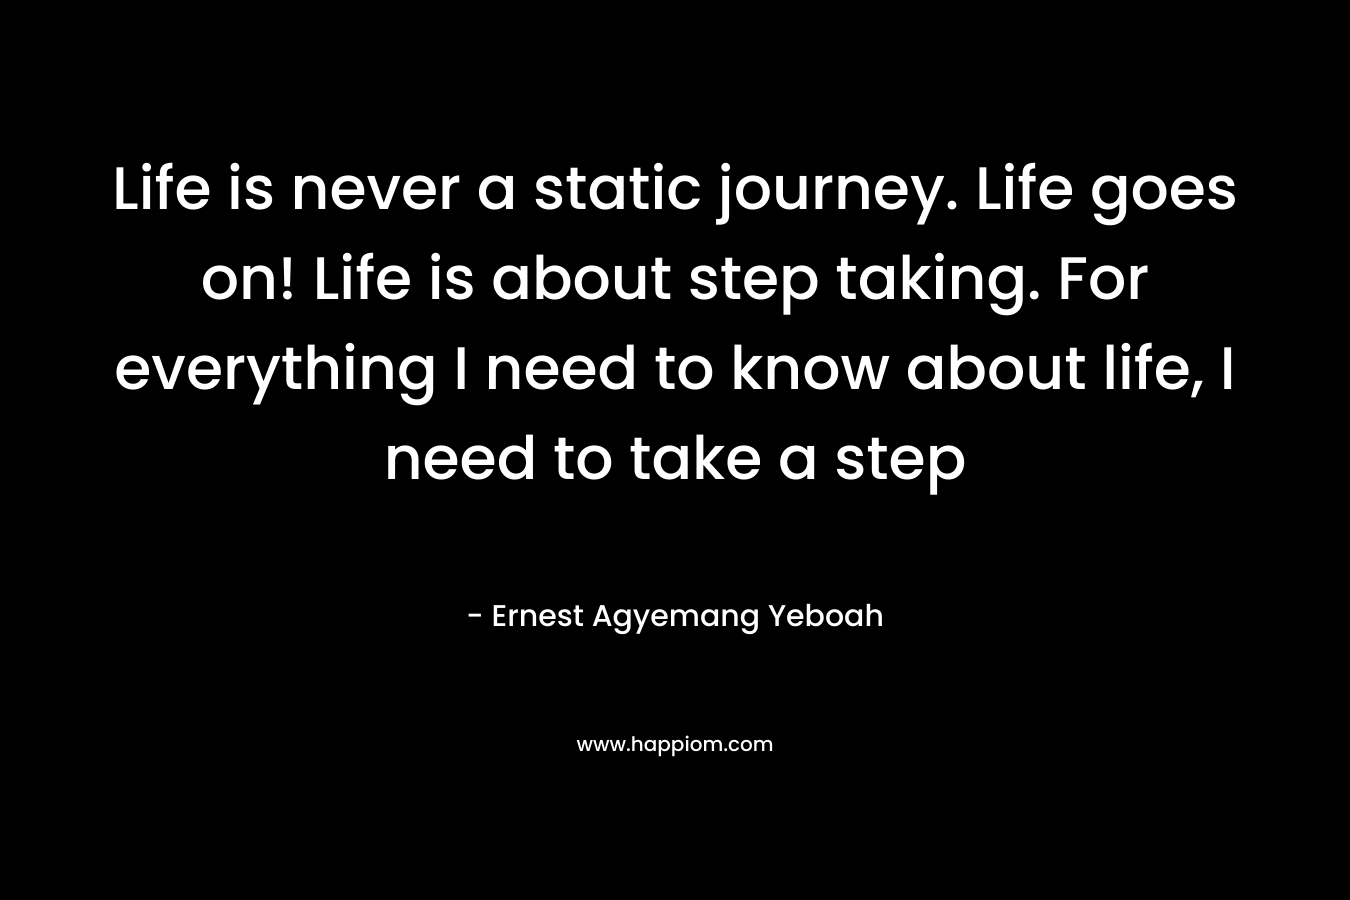 Life is never a static journey. Life goes on! Life is about step taking. For everything I need to know about life, I need to take a step